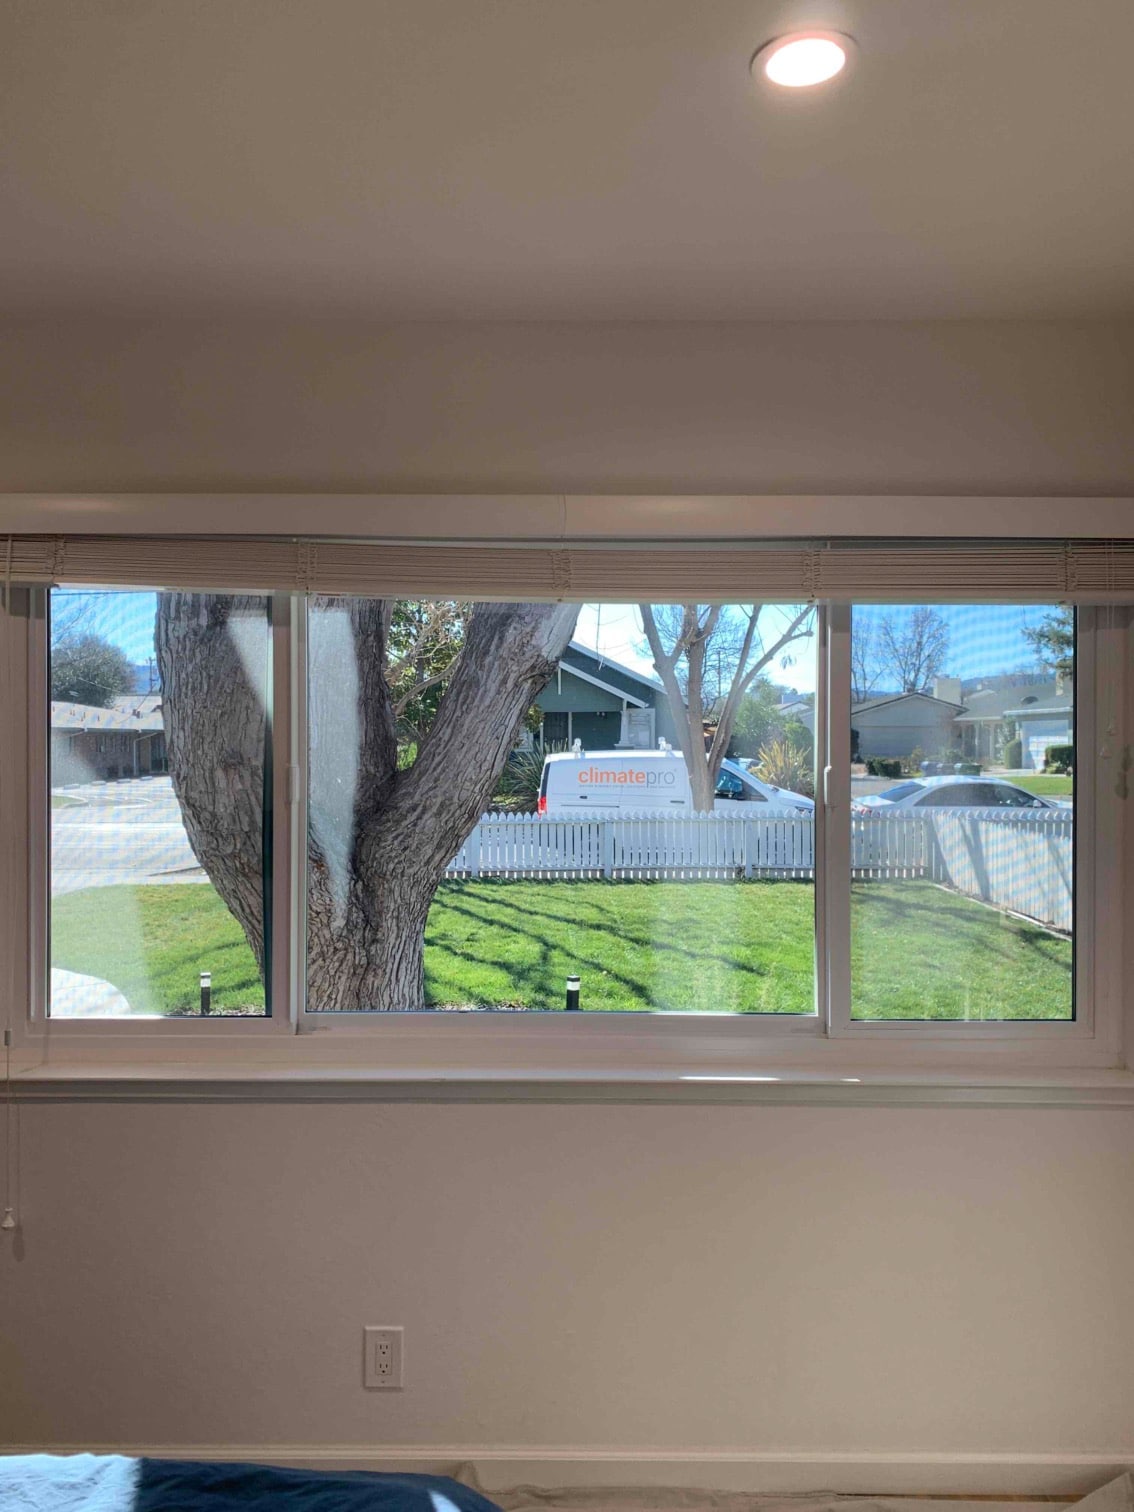 Transform your San Jose Home with 3M Window Tint, installed by ClimatePro